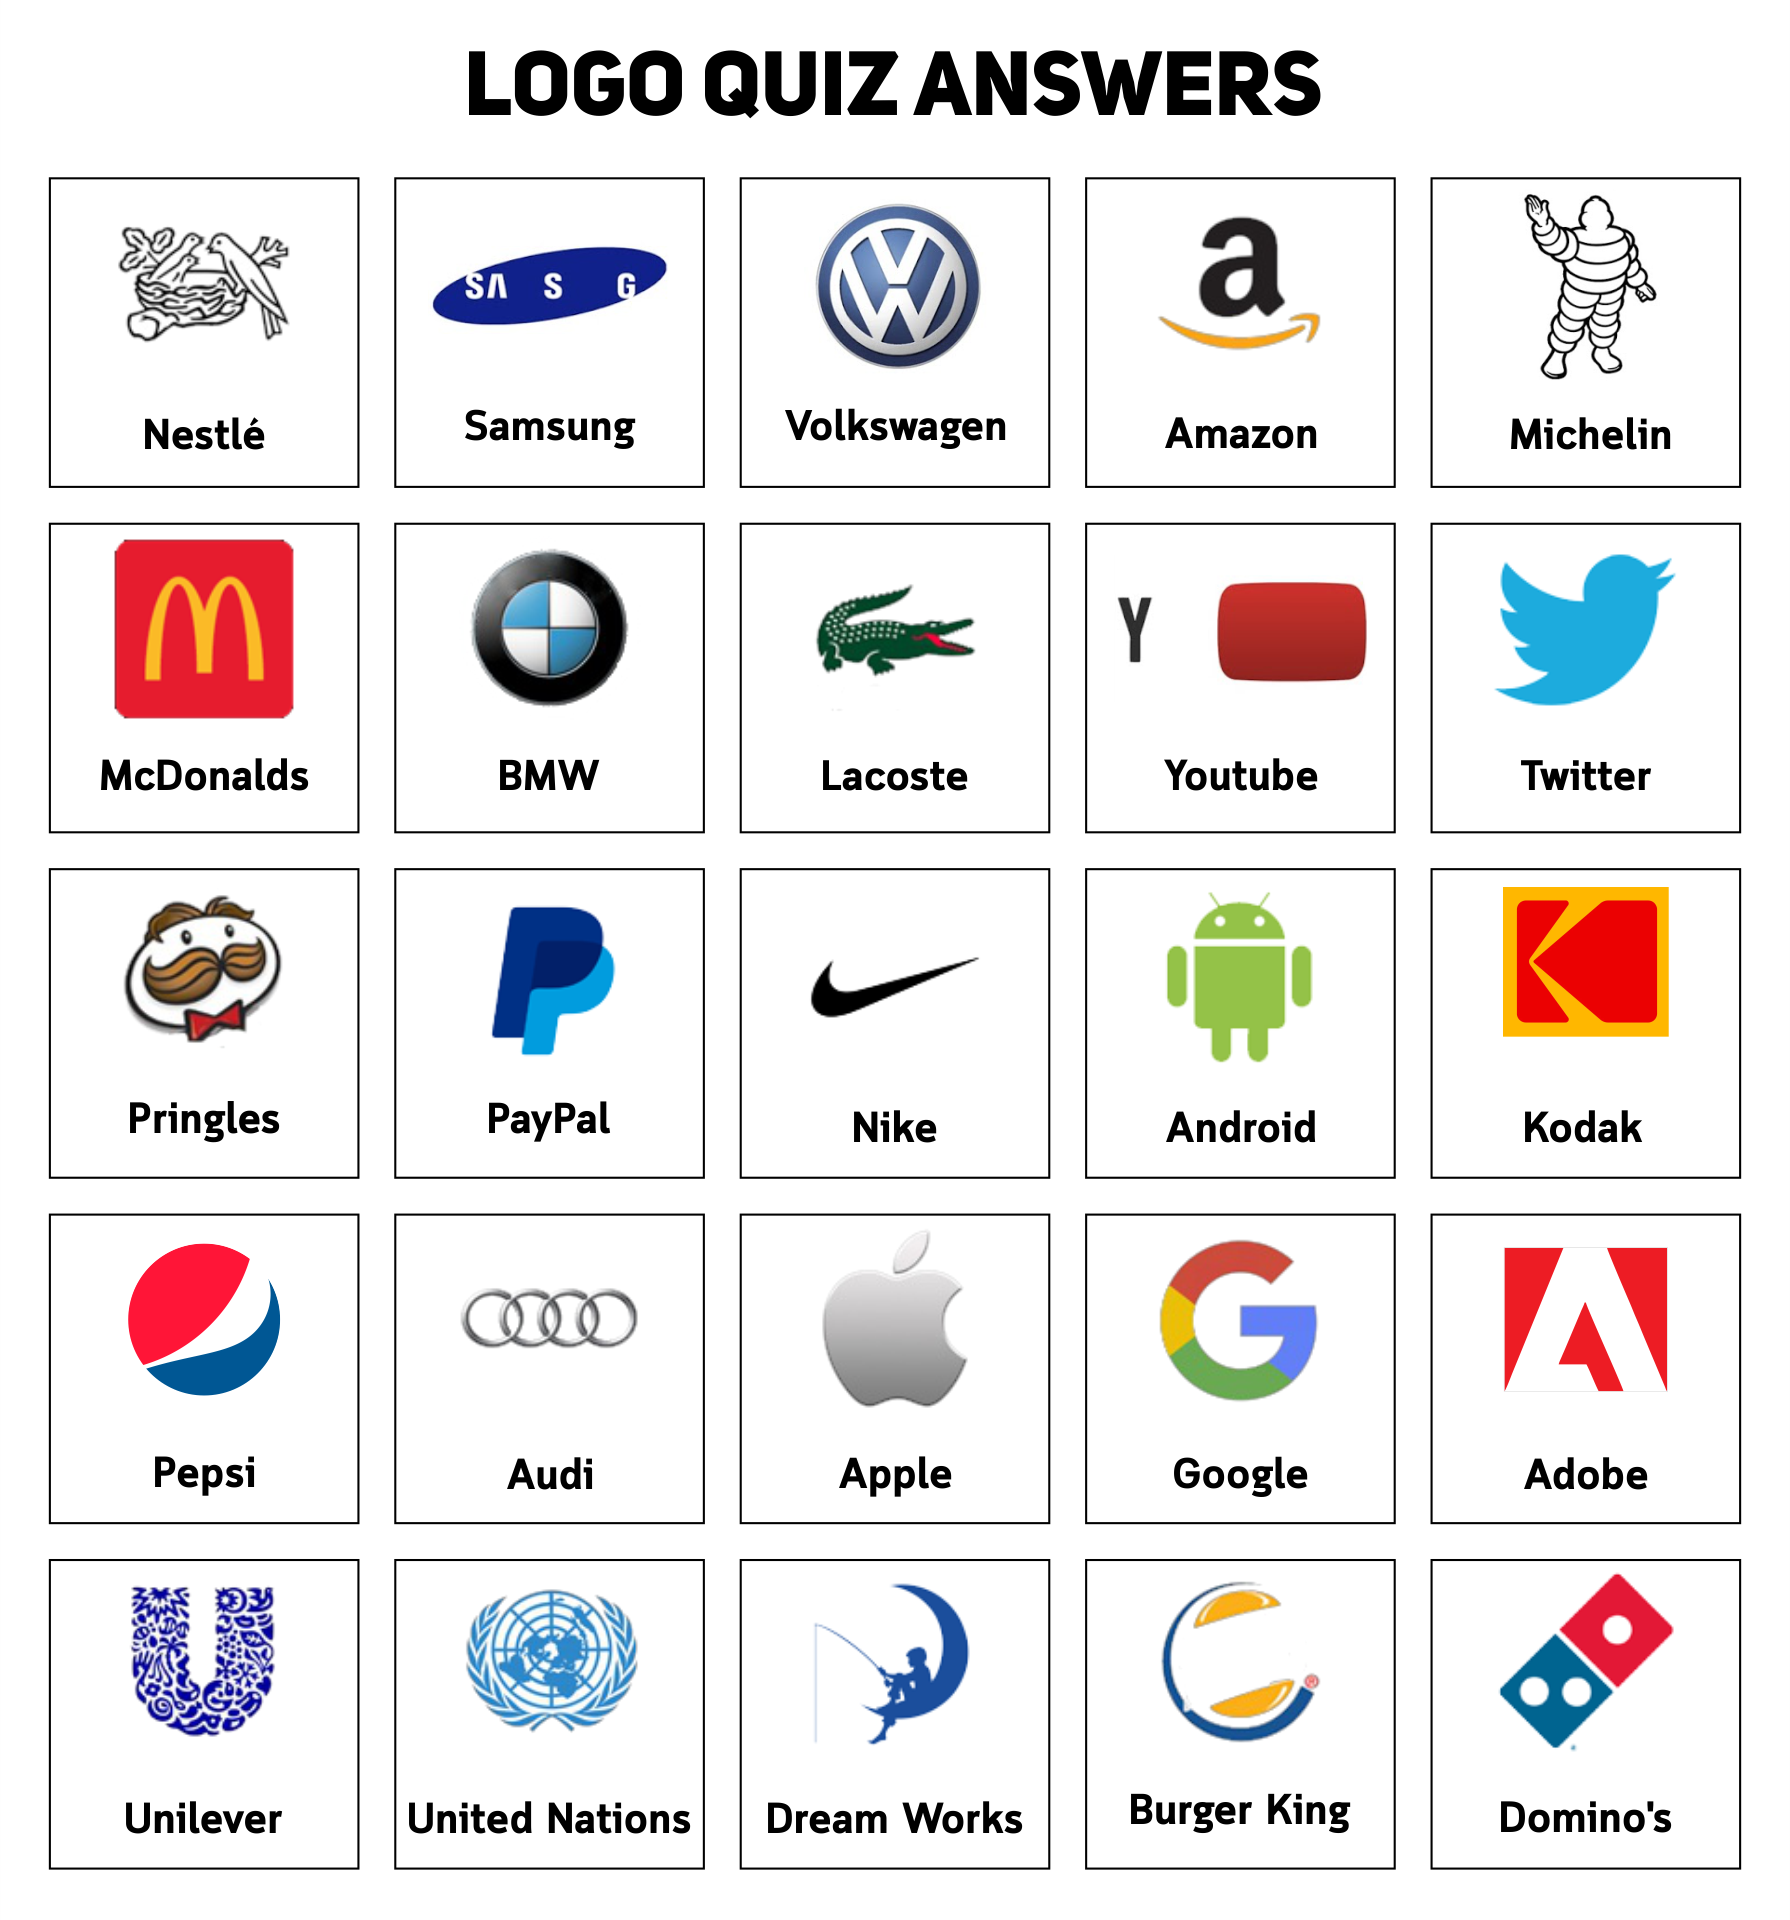 can-you-help-me-with-the-answers-for-this-logo-game-imamother